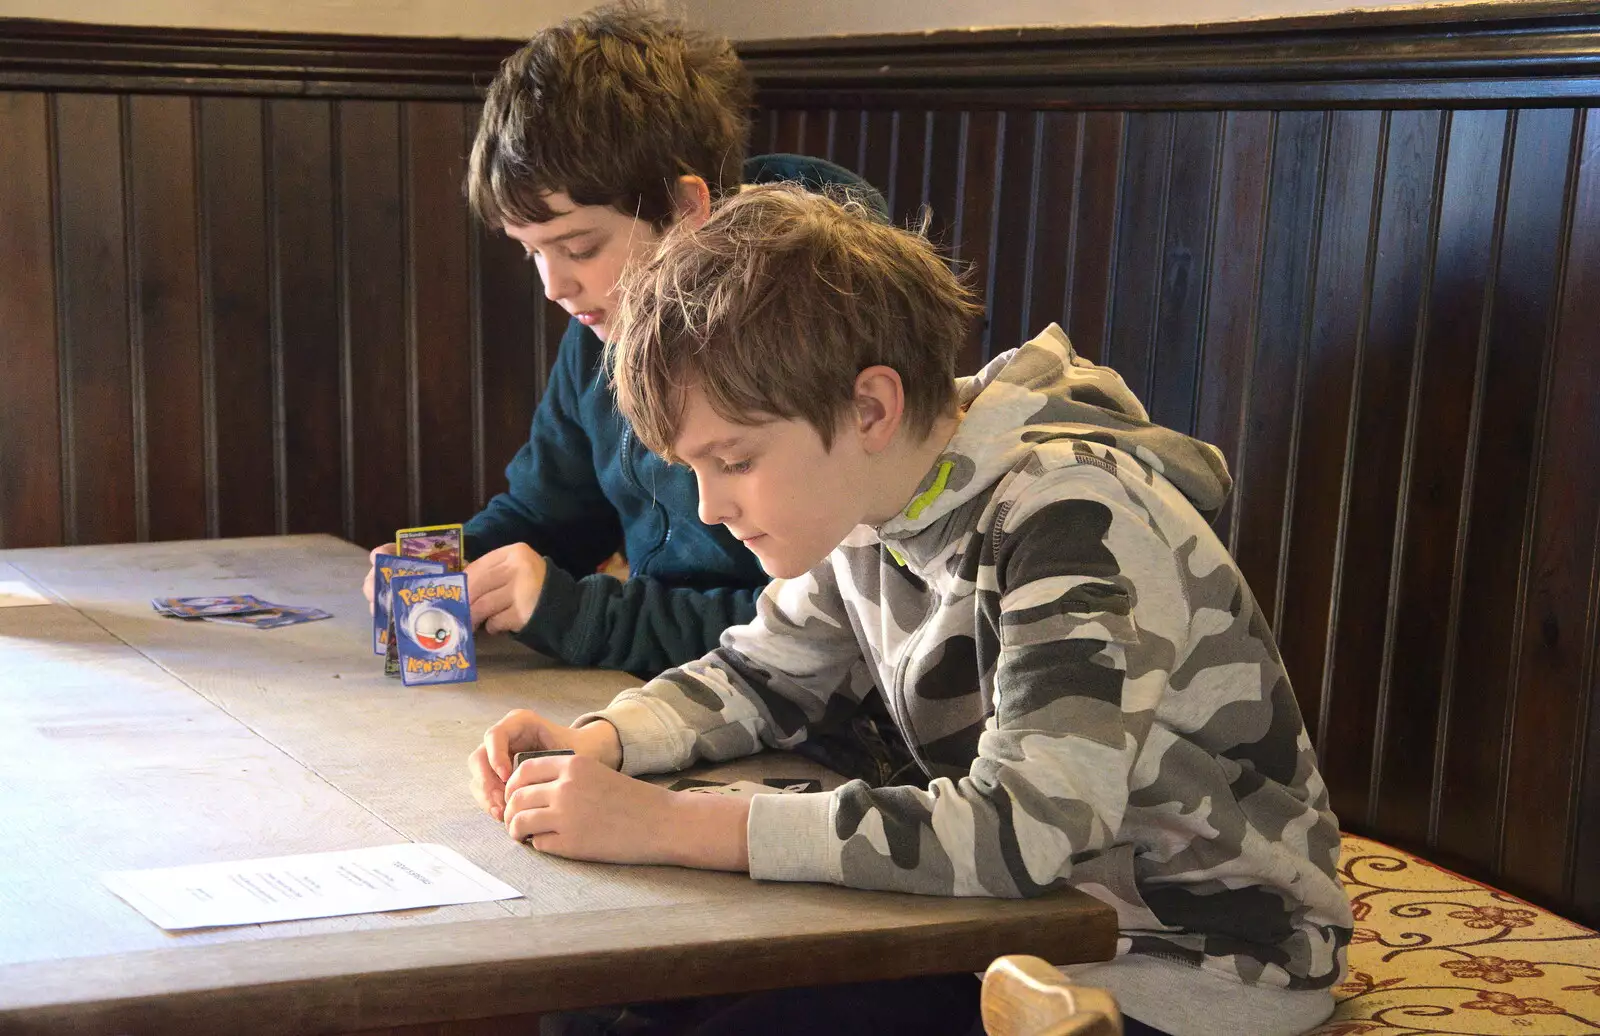 The boys concentrate on card-house building, from A Trip to Orford Castle, Orford, Suffolk - 26th February 2022